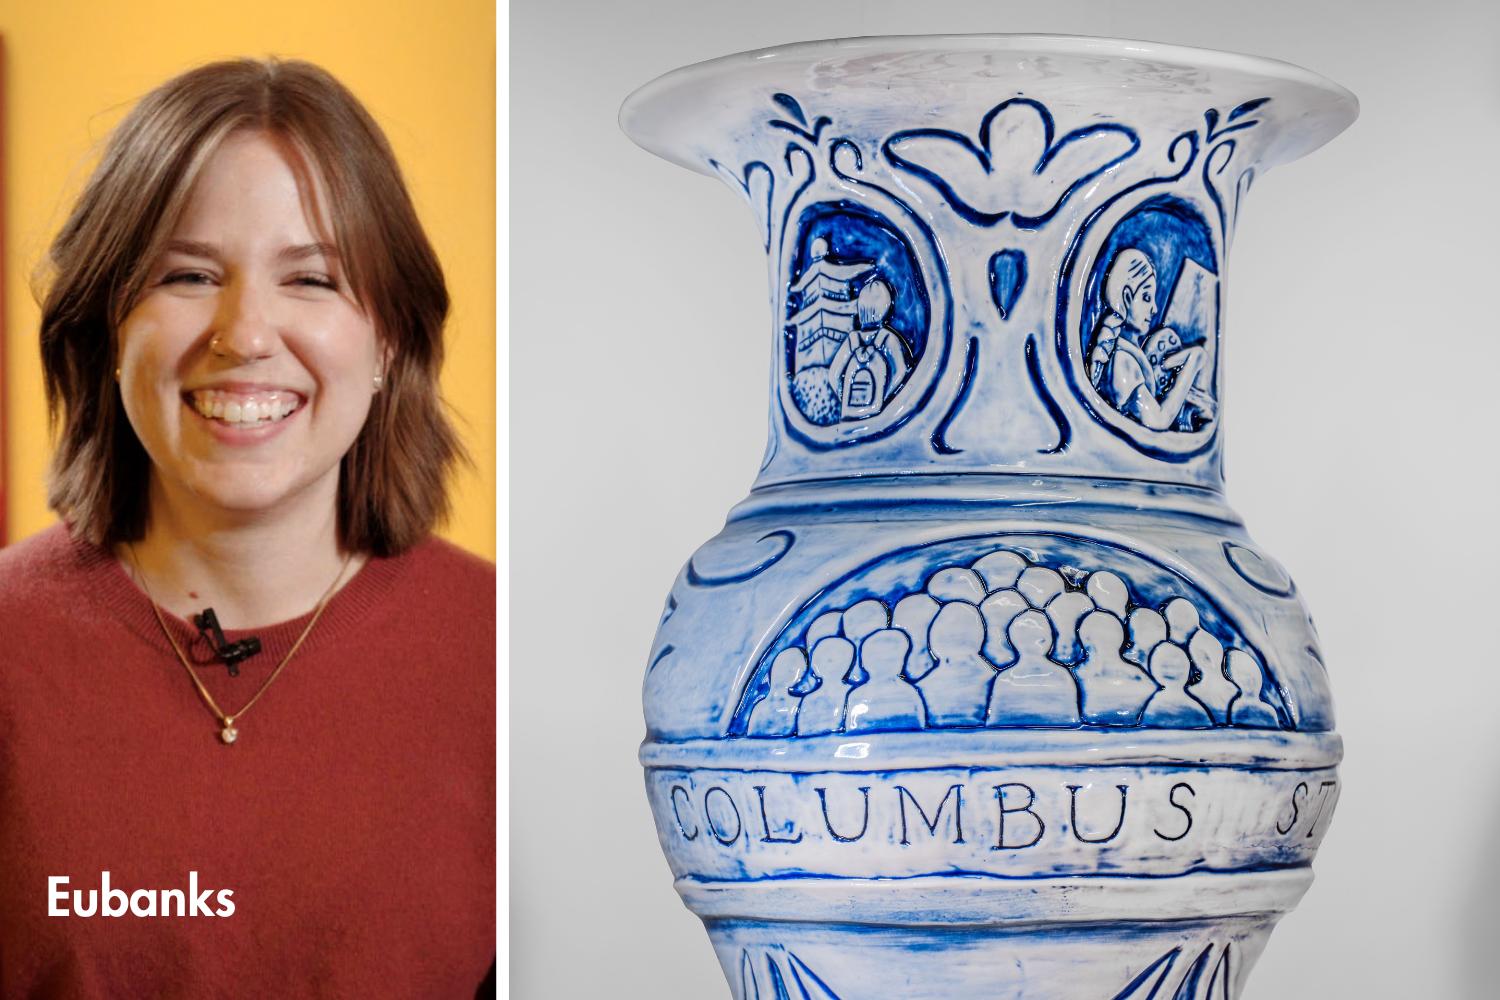 Headshot of Campbell Eubanks with an image of her vase